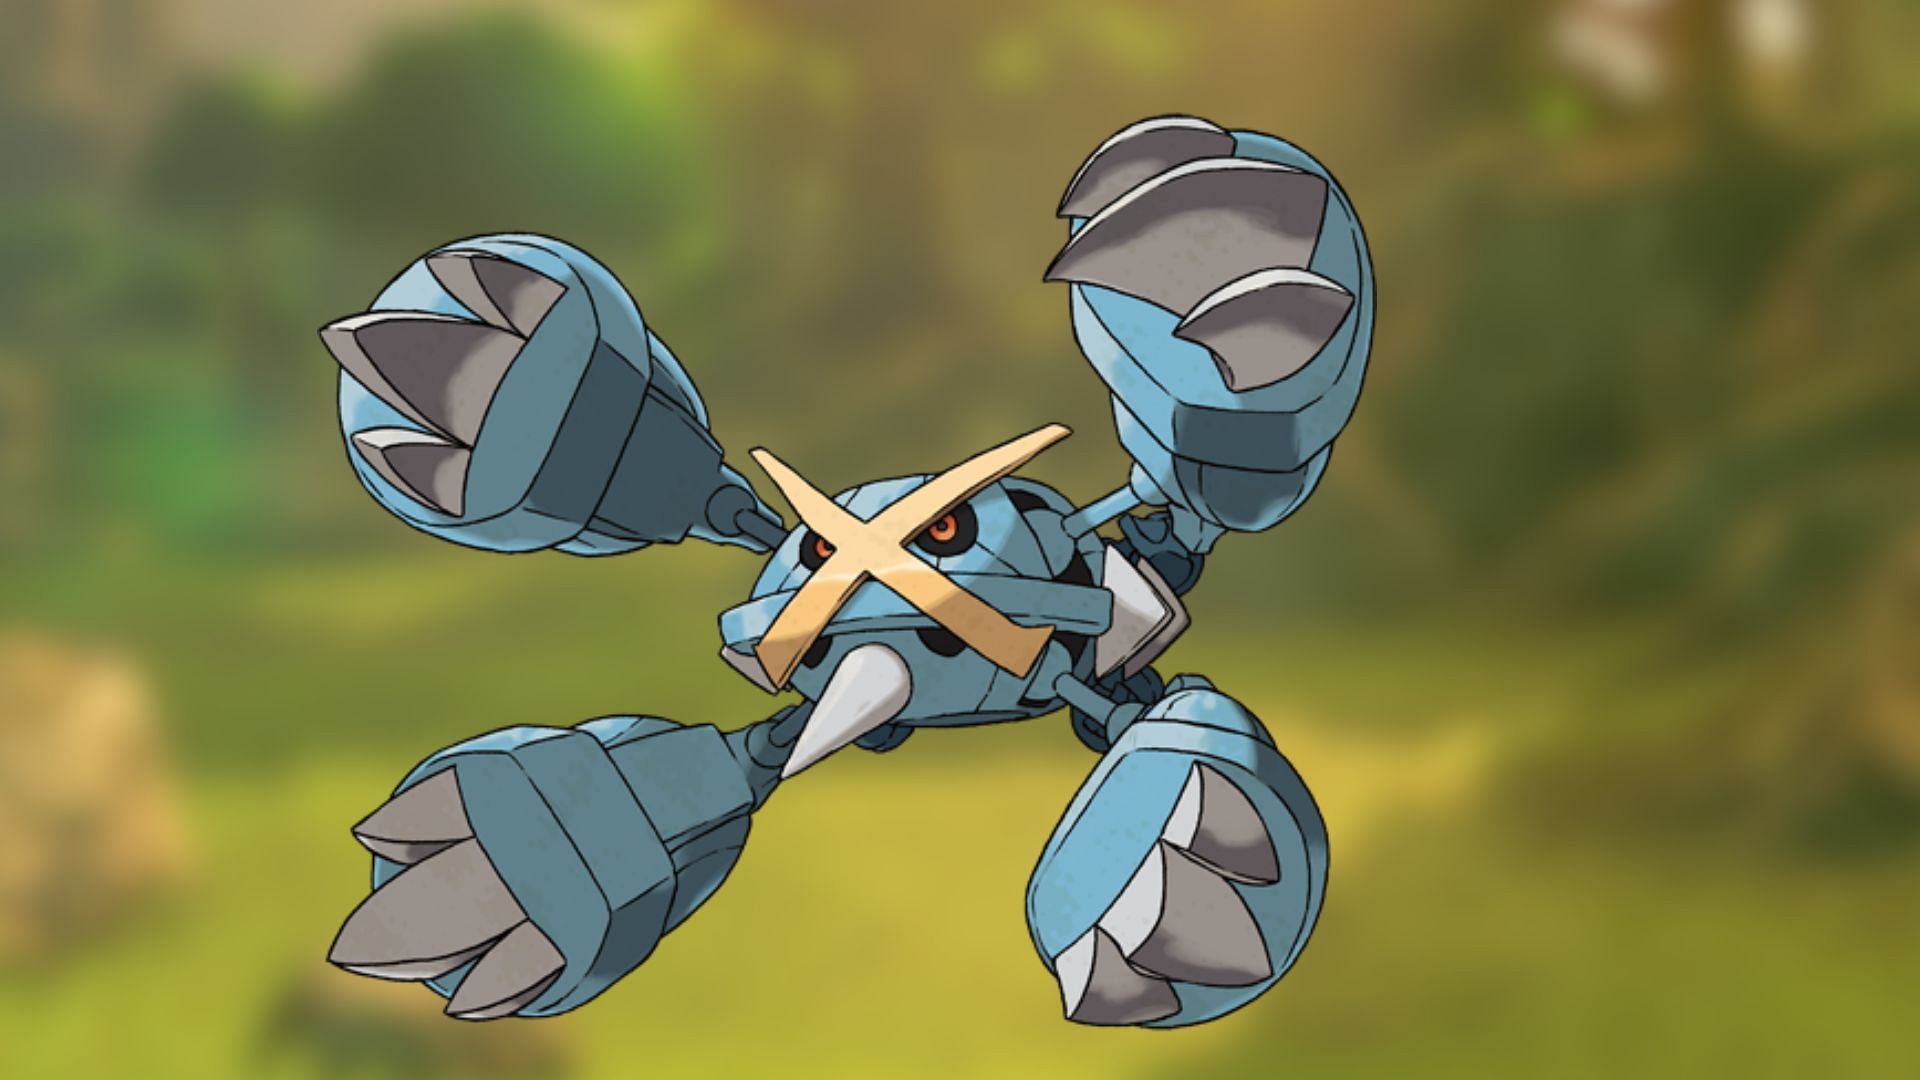 How to get Metagross and Shiny Metagross in Pokemon GO